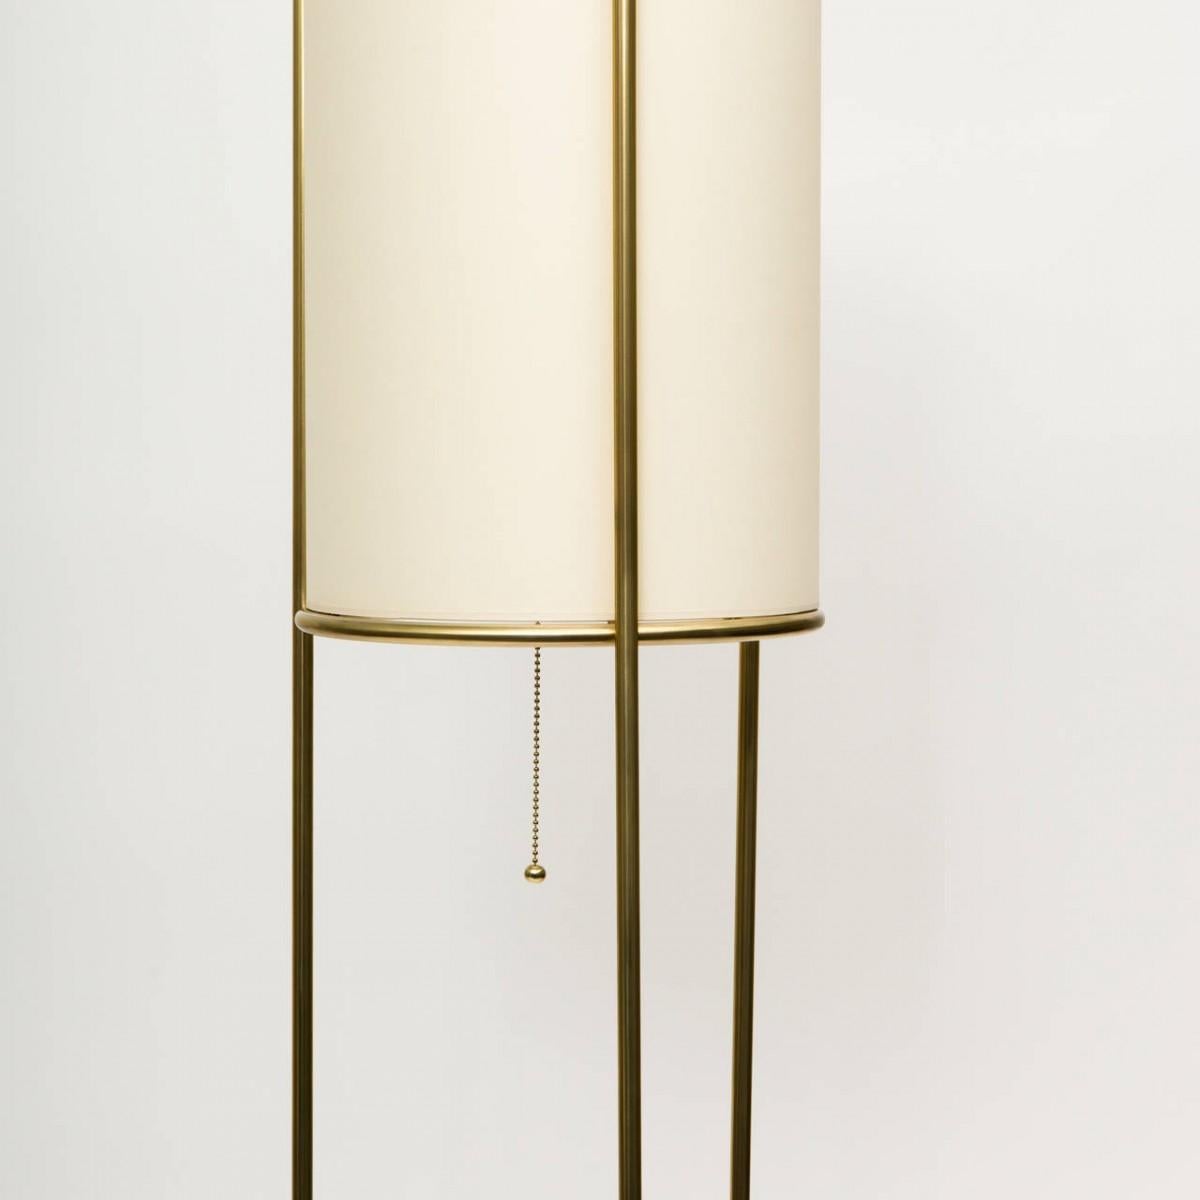 Pair of Tripod Brass Floor Lamps in the Manner of T.H. Robsjohn-Gibbings In Excellent Condition For Sale In Tarrytown, NY